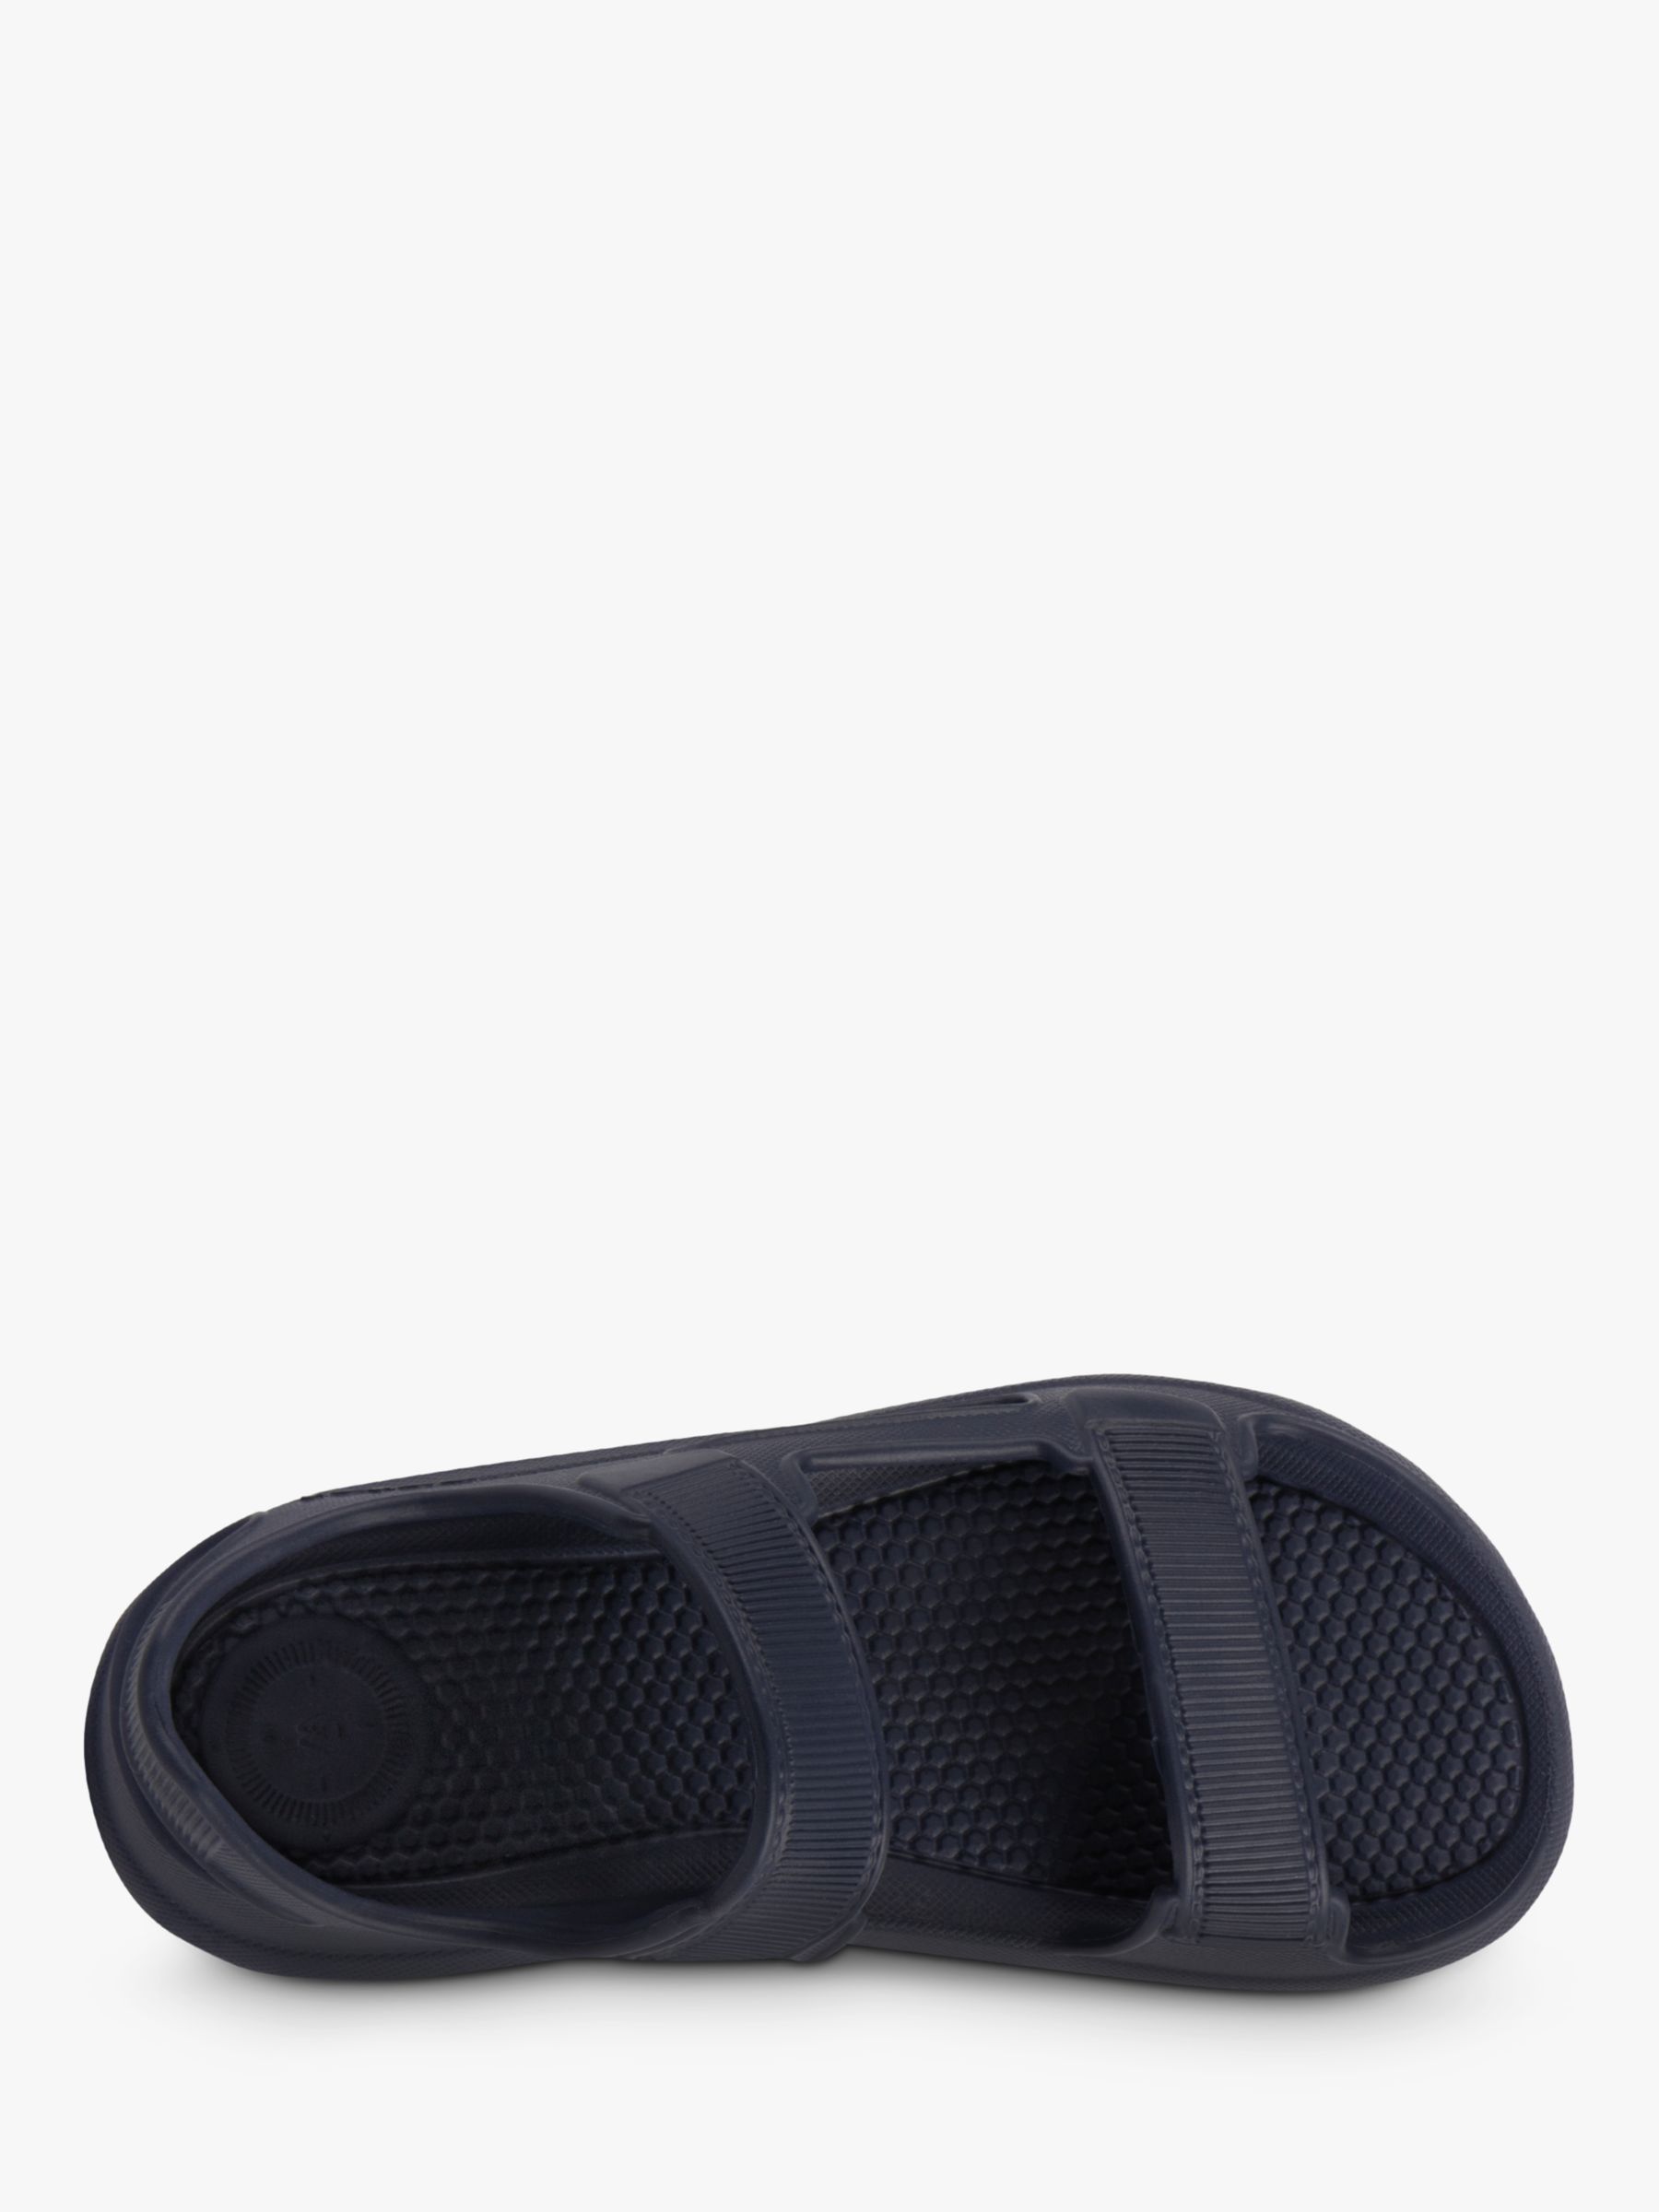 Buy totes Kids' SolBounce Sports Sandals, Navy Online at johnlewis.com